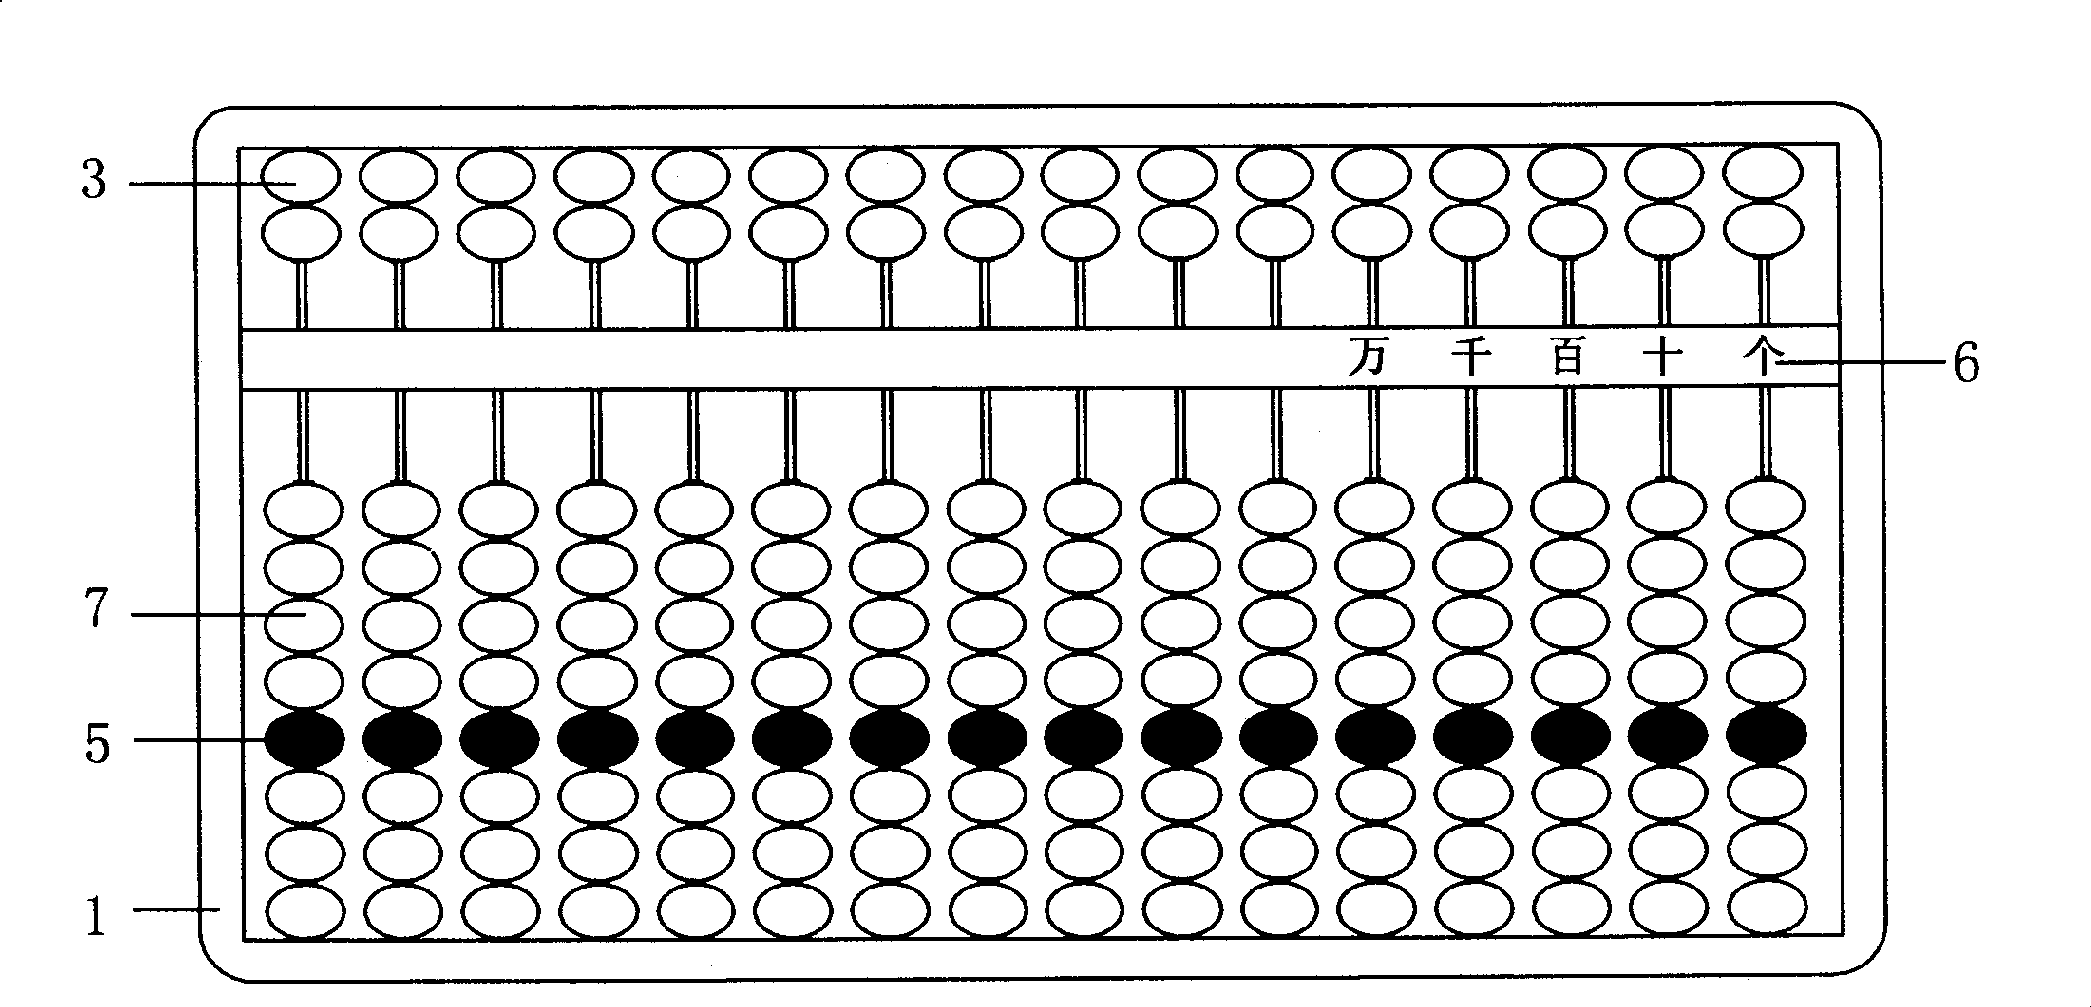 Lower eight type direct adding and subtracting abacus